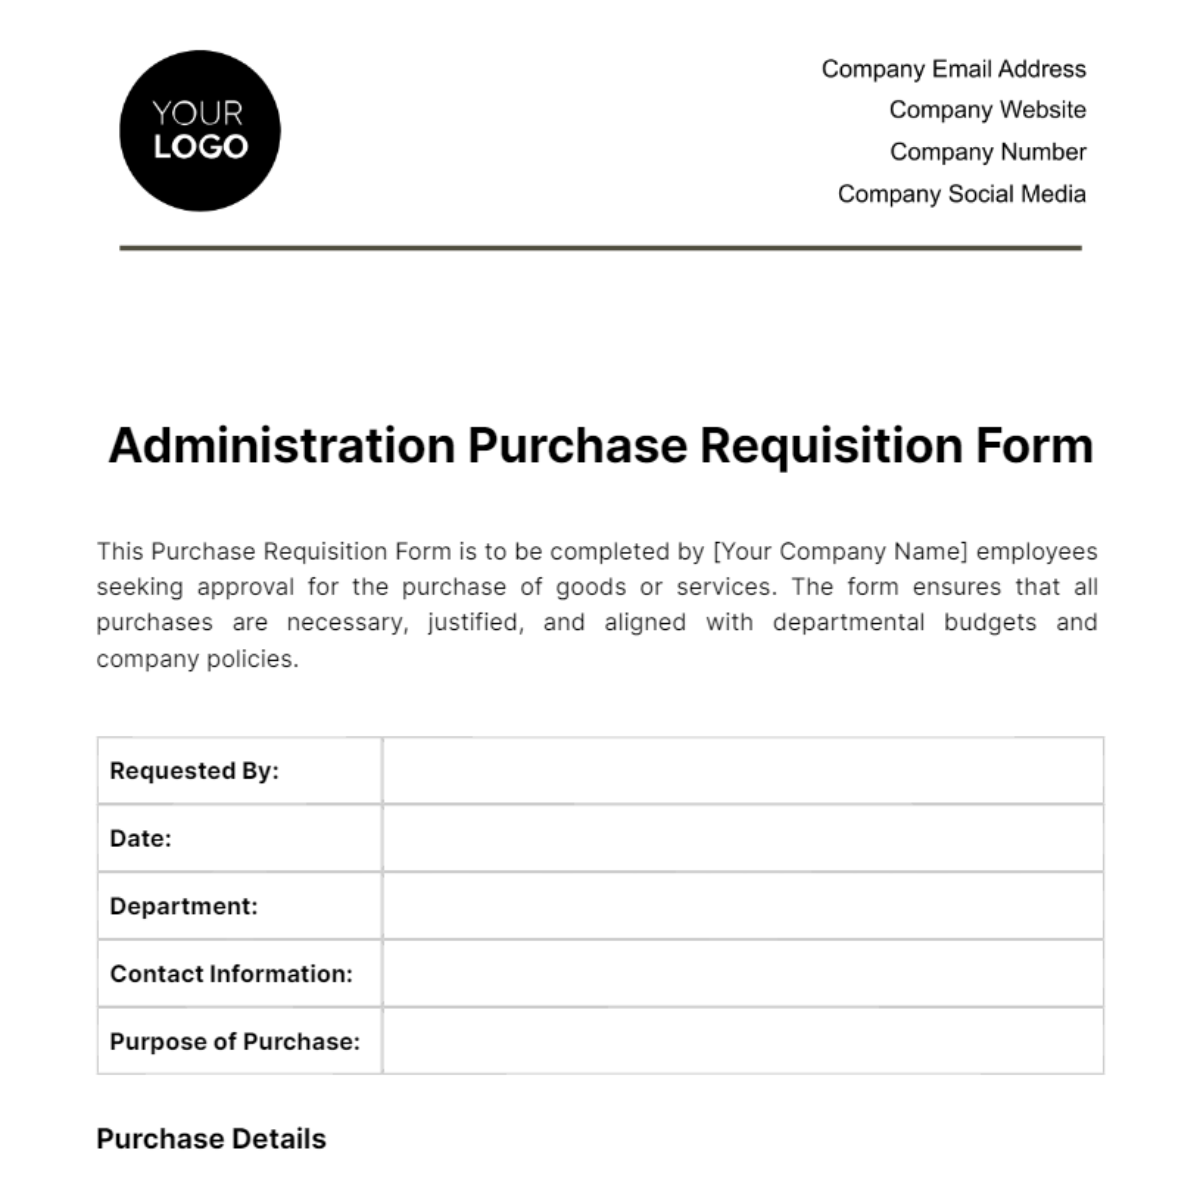 Free Administration Purchase Requisition Form Template